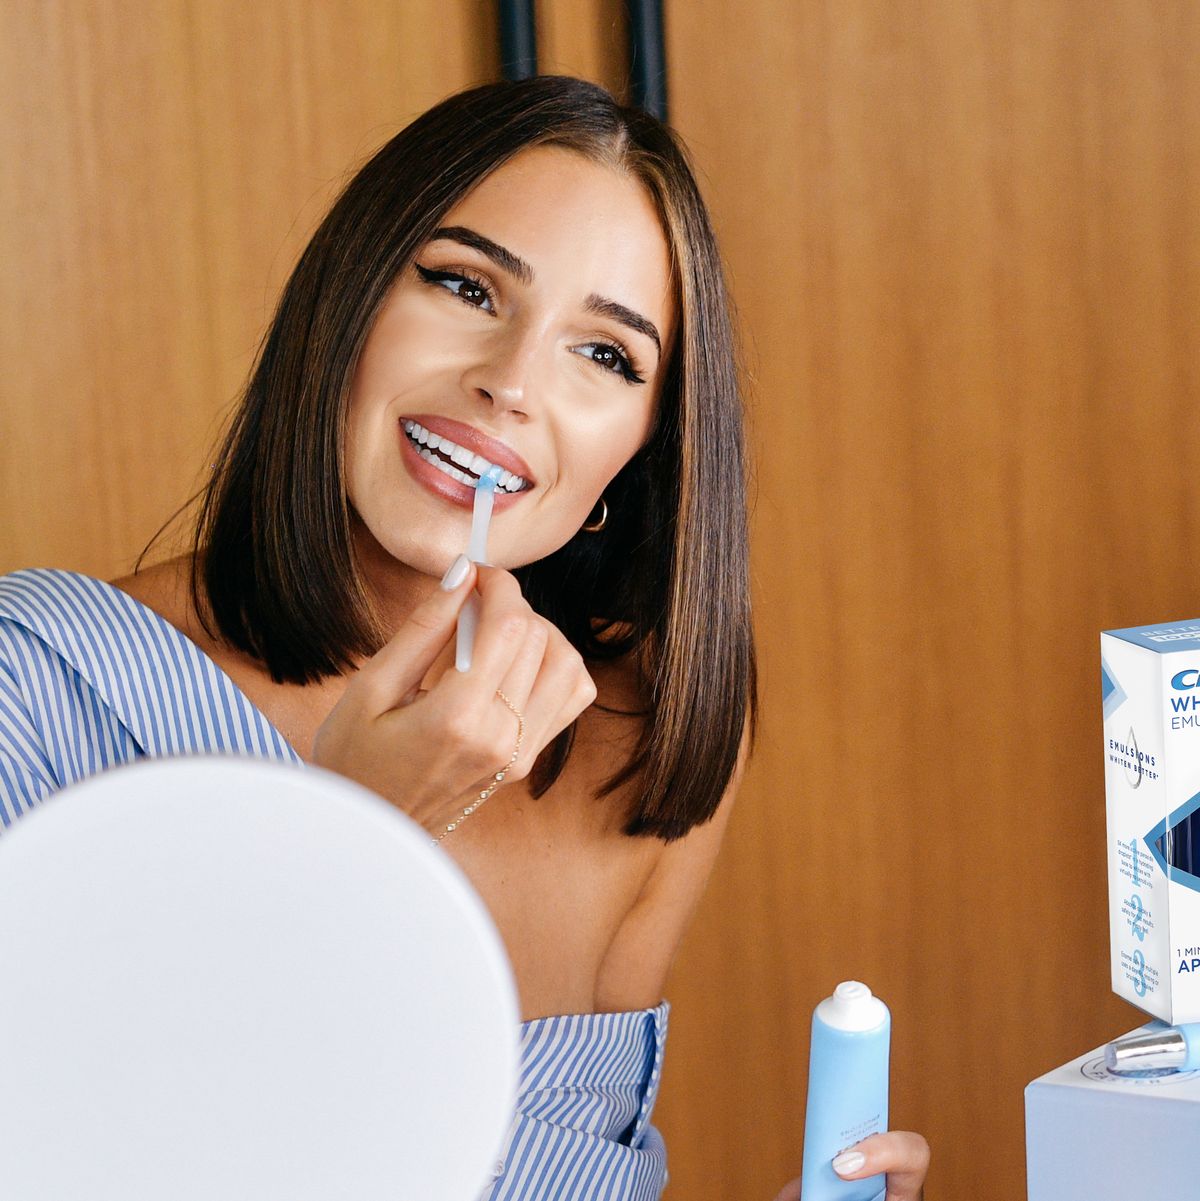 The Best Teeth Whitening Kits According to Dentists